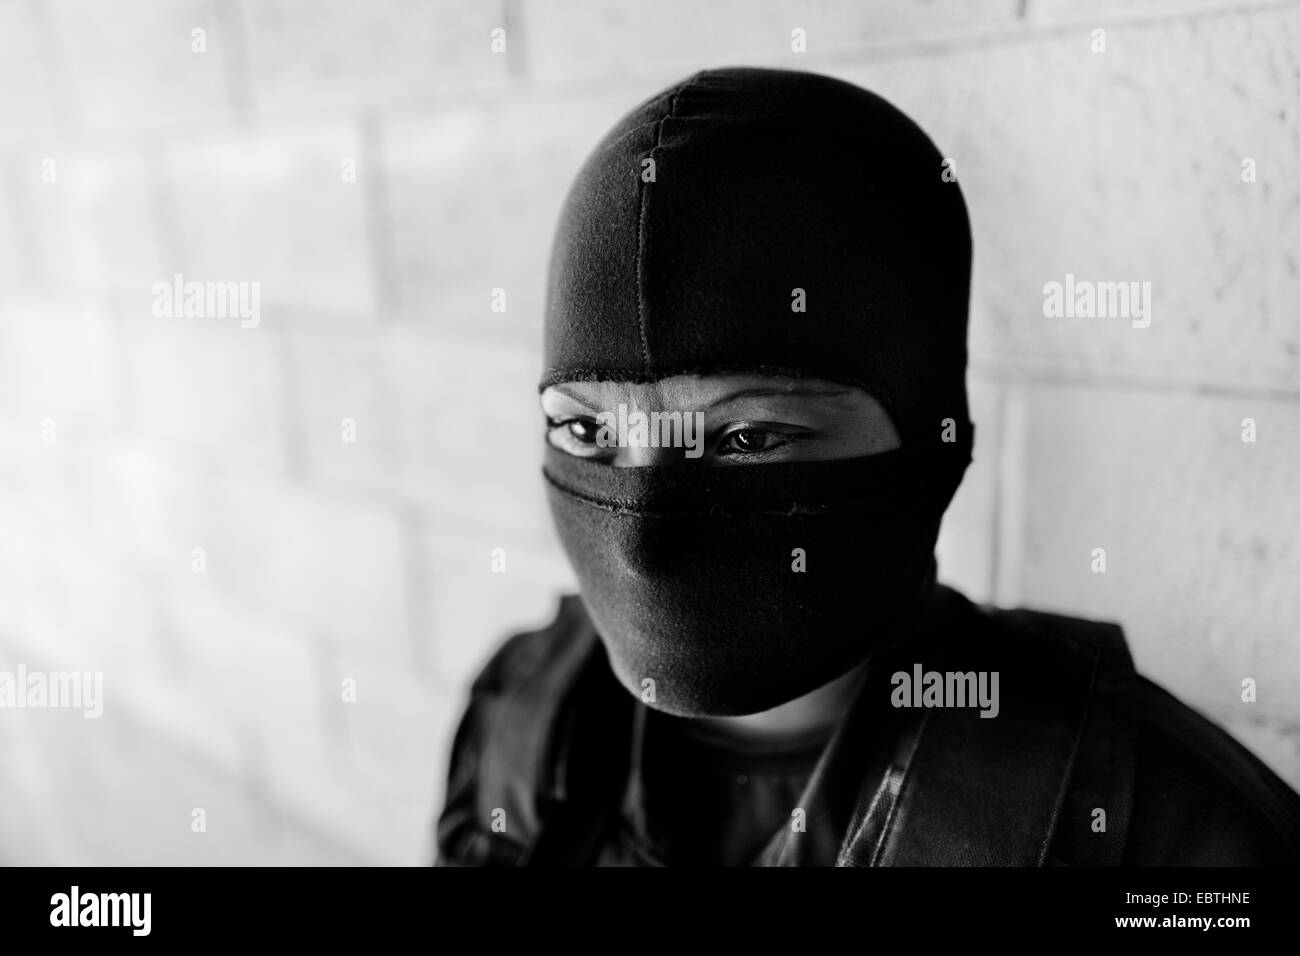 A member of the specialized Police anti-gang unit (Unidad Antipandillas) poses for a picture on the police base before leaving for an operation in San Salvador, El Salvador, 19 December 2013. Stock Photo